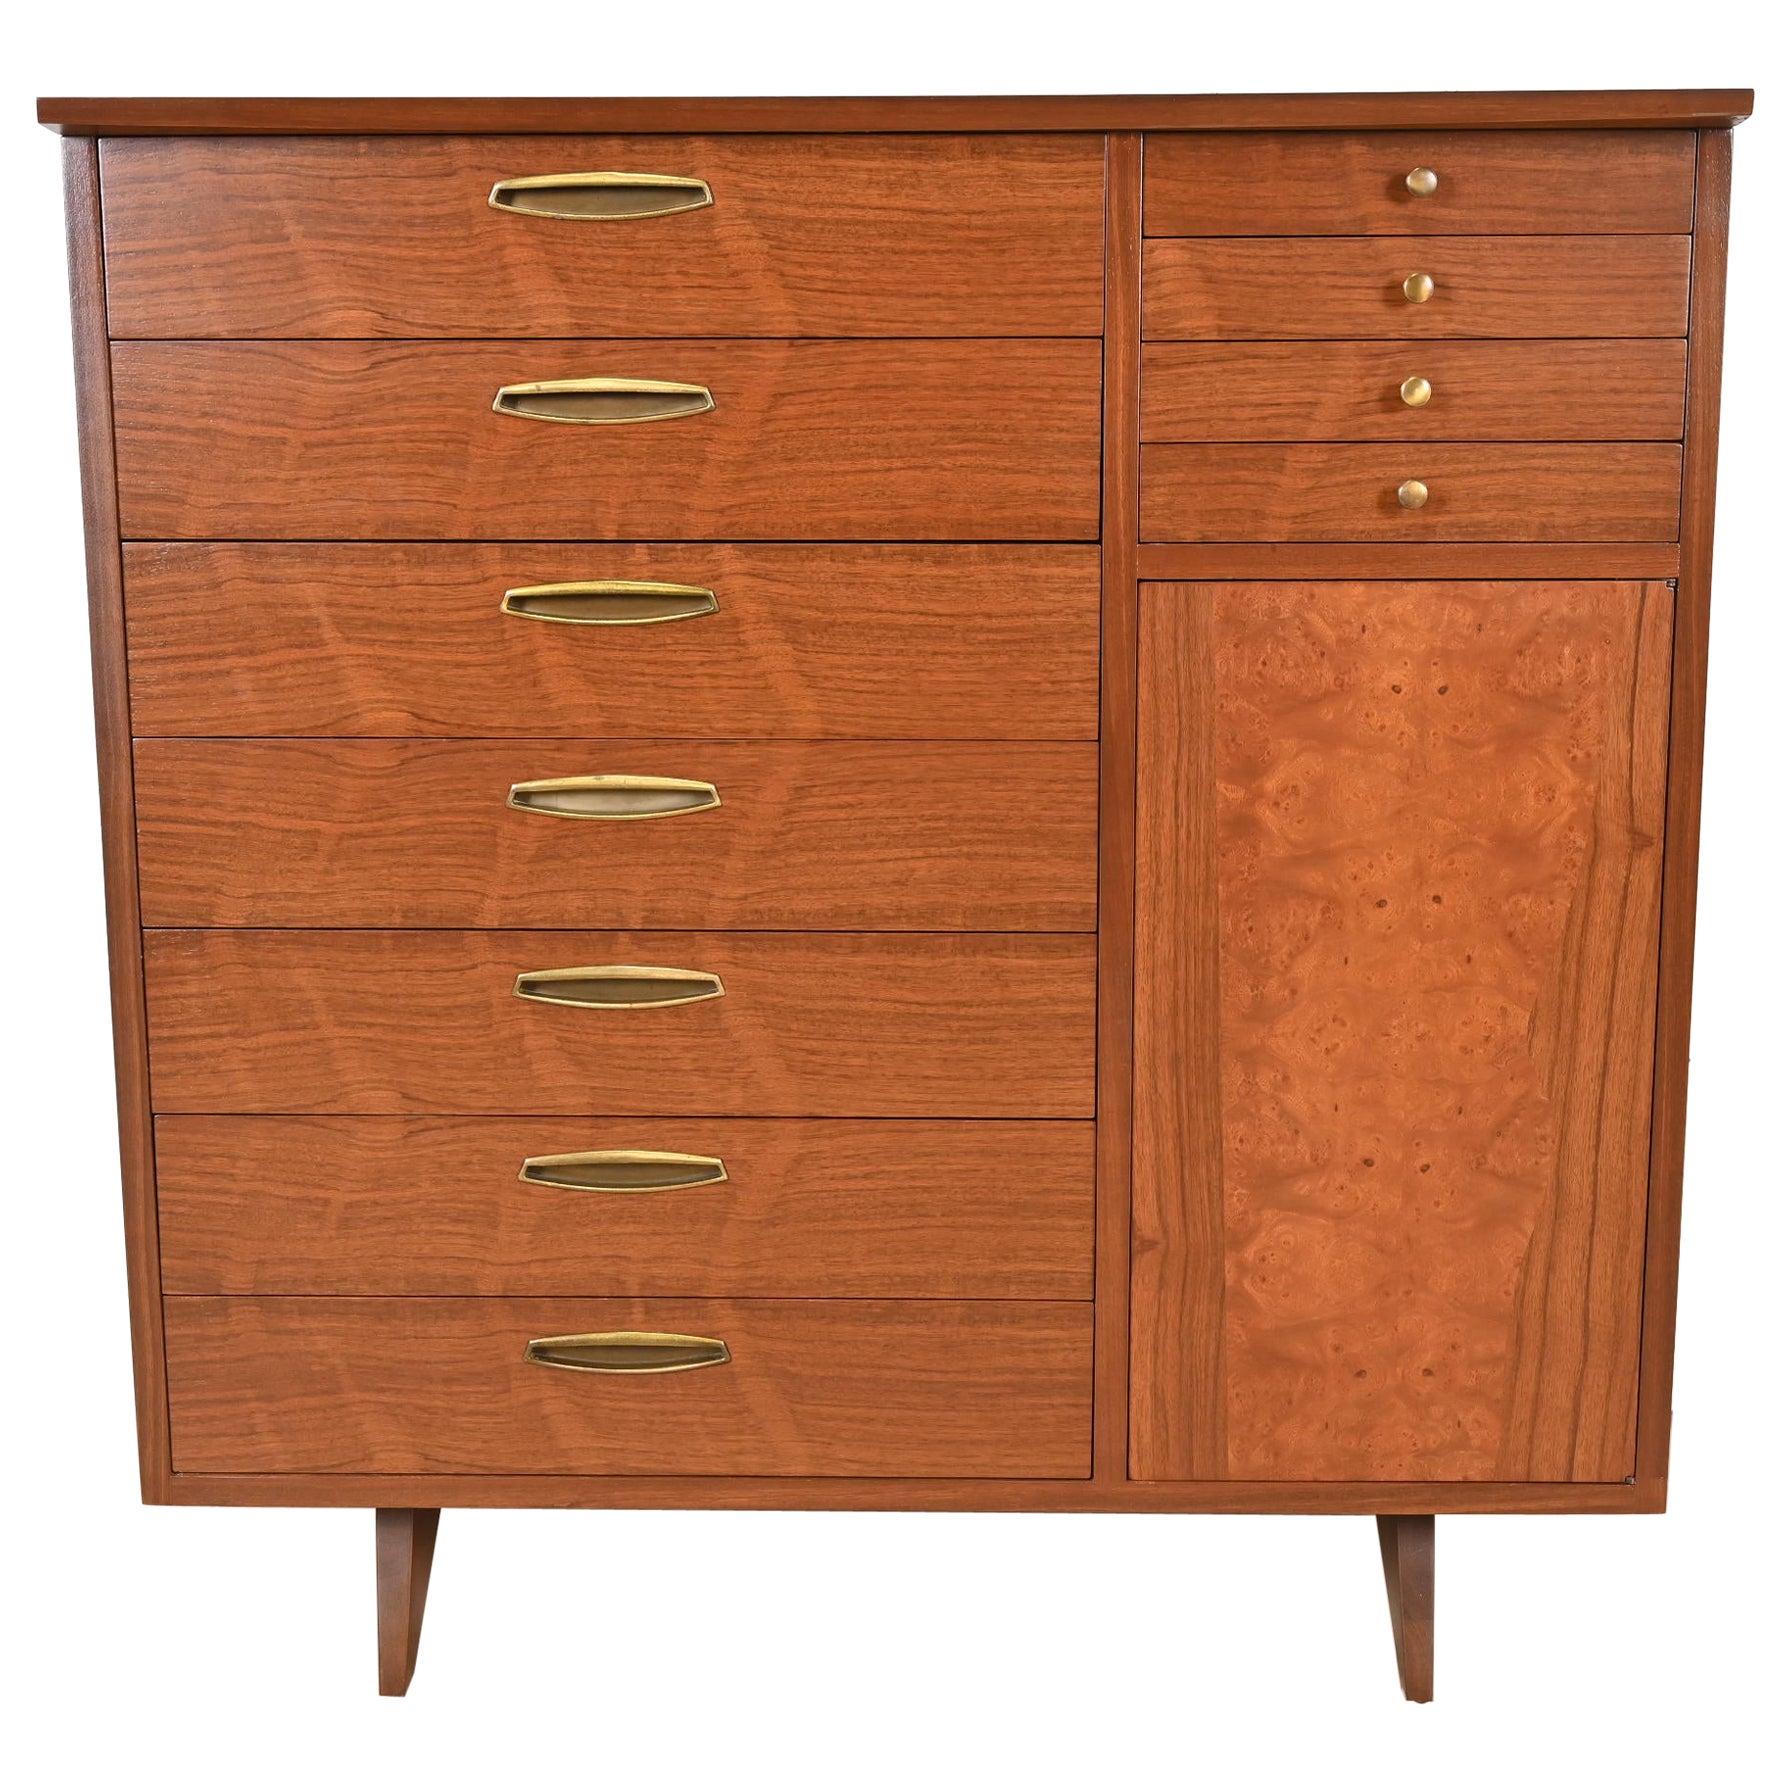 George Nakashima Sculpted Walnut Gentleman's Chest for Widdicomb, Newly Restored For Sale